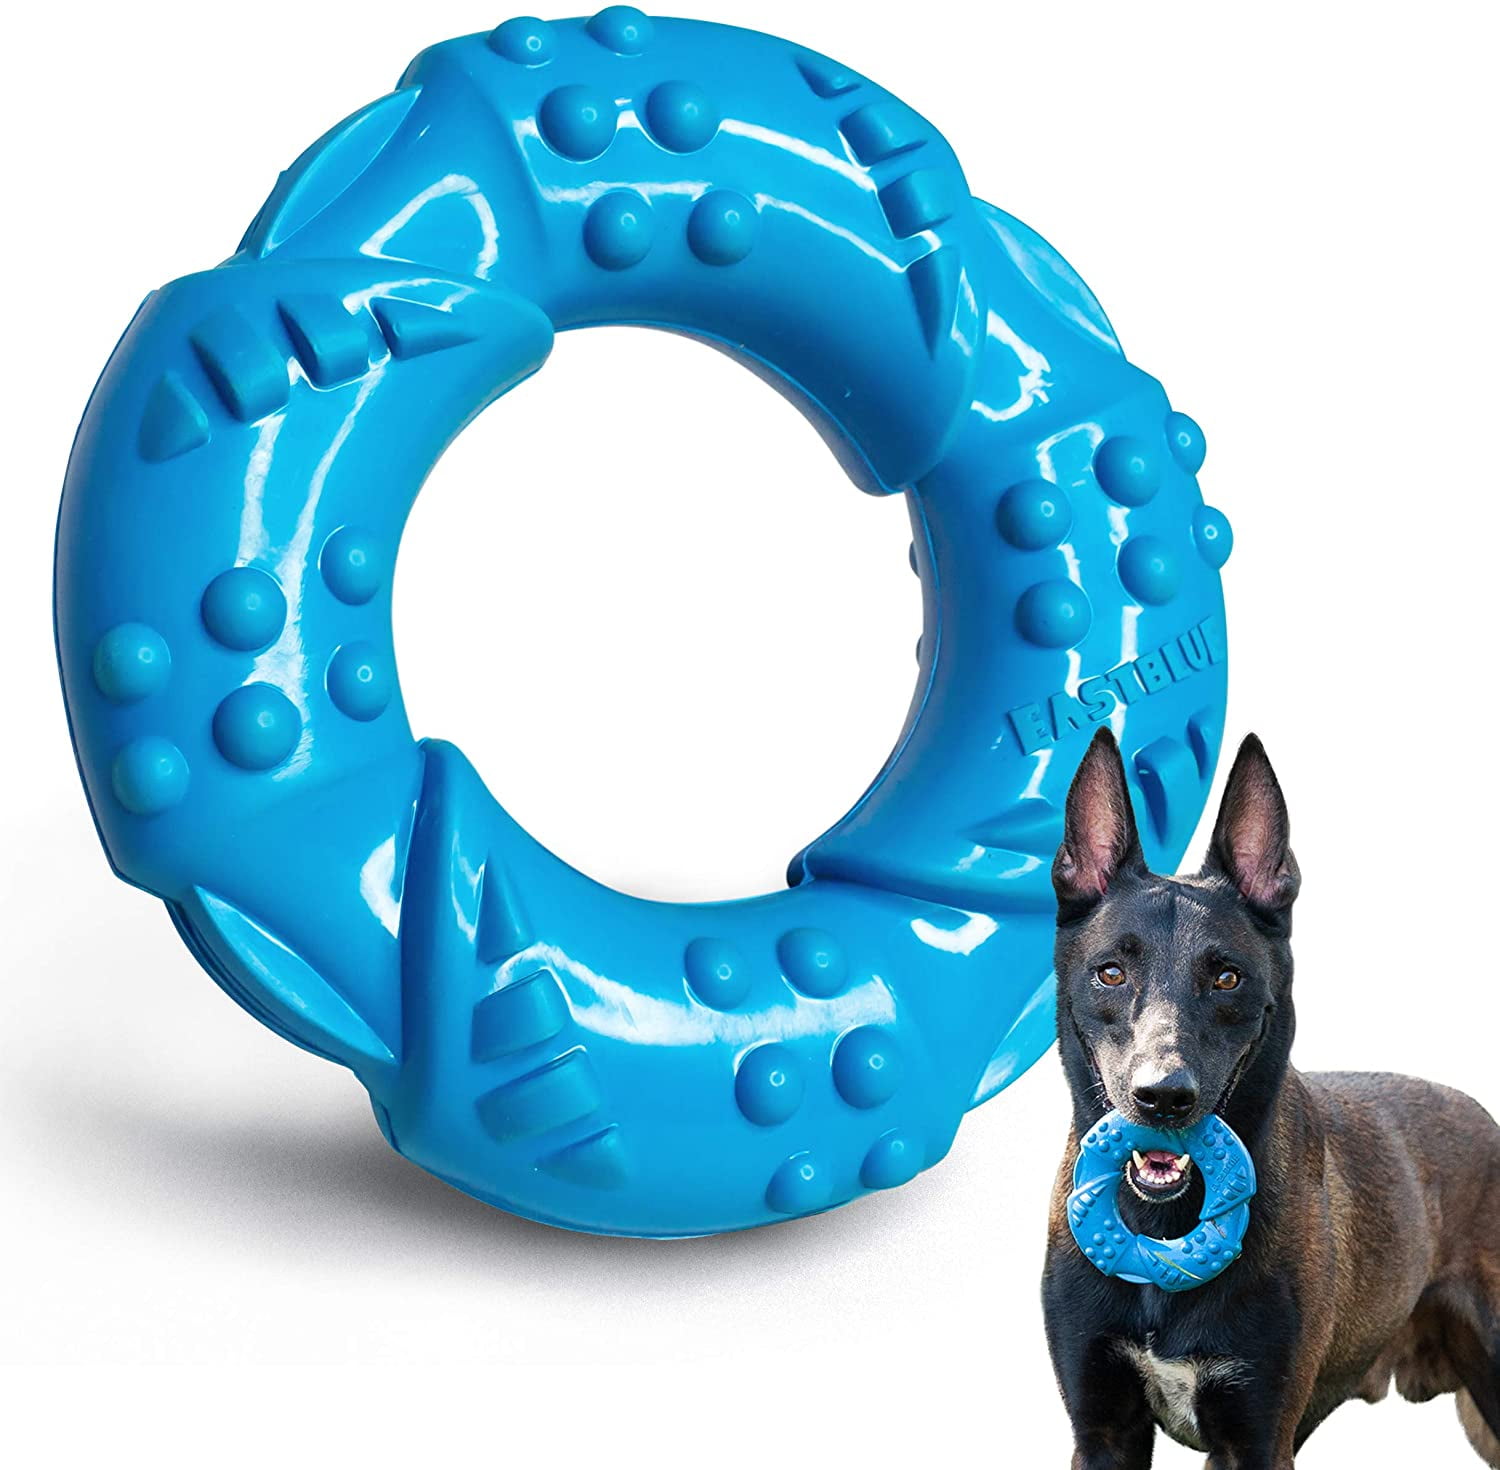 Interactive Dog Toys Rubber Chew Toy, Auto Moving Dog Toy for Small Medium Dogs,Motion-Activated/USB Rechargeable, Blue